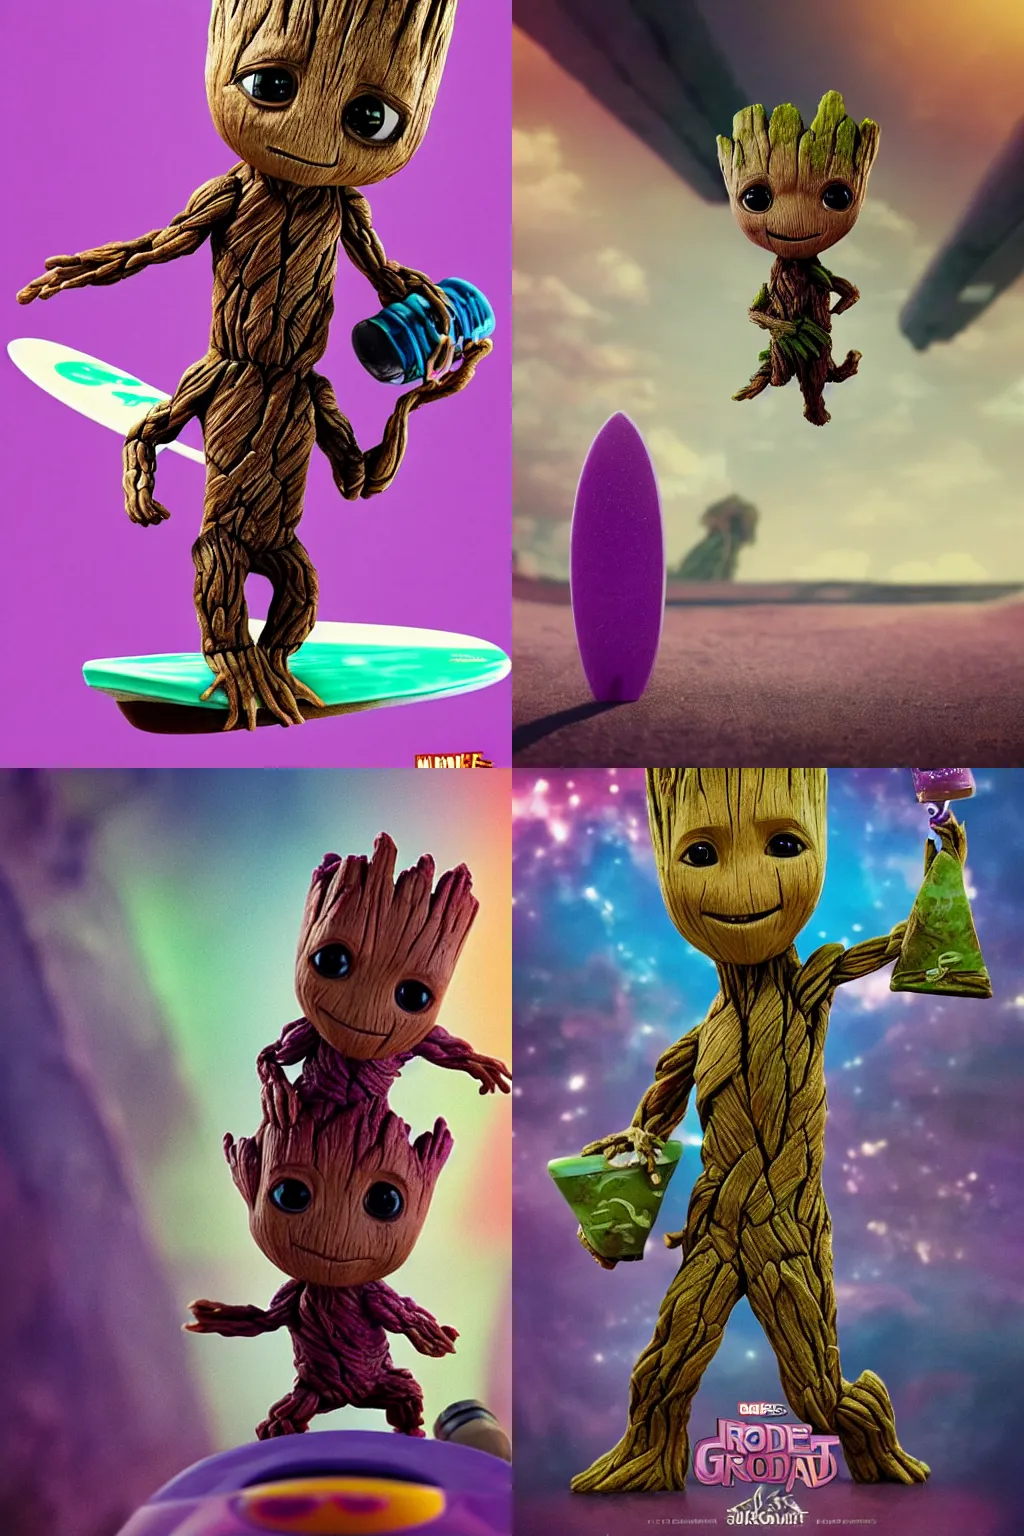 Prompt: little Groot is riding a bar of purple soap like surfboard, cinematic angle, poster style